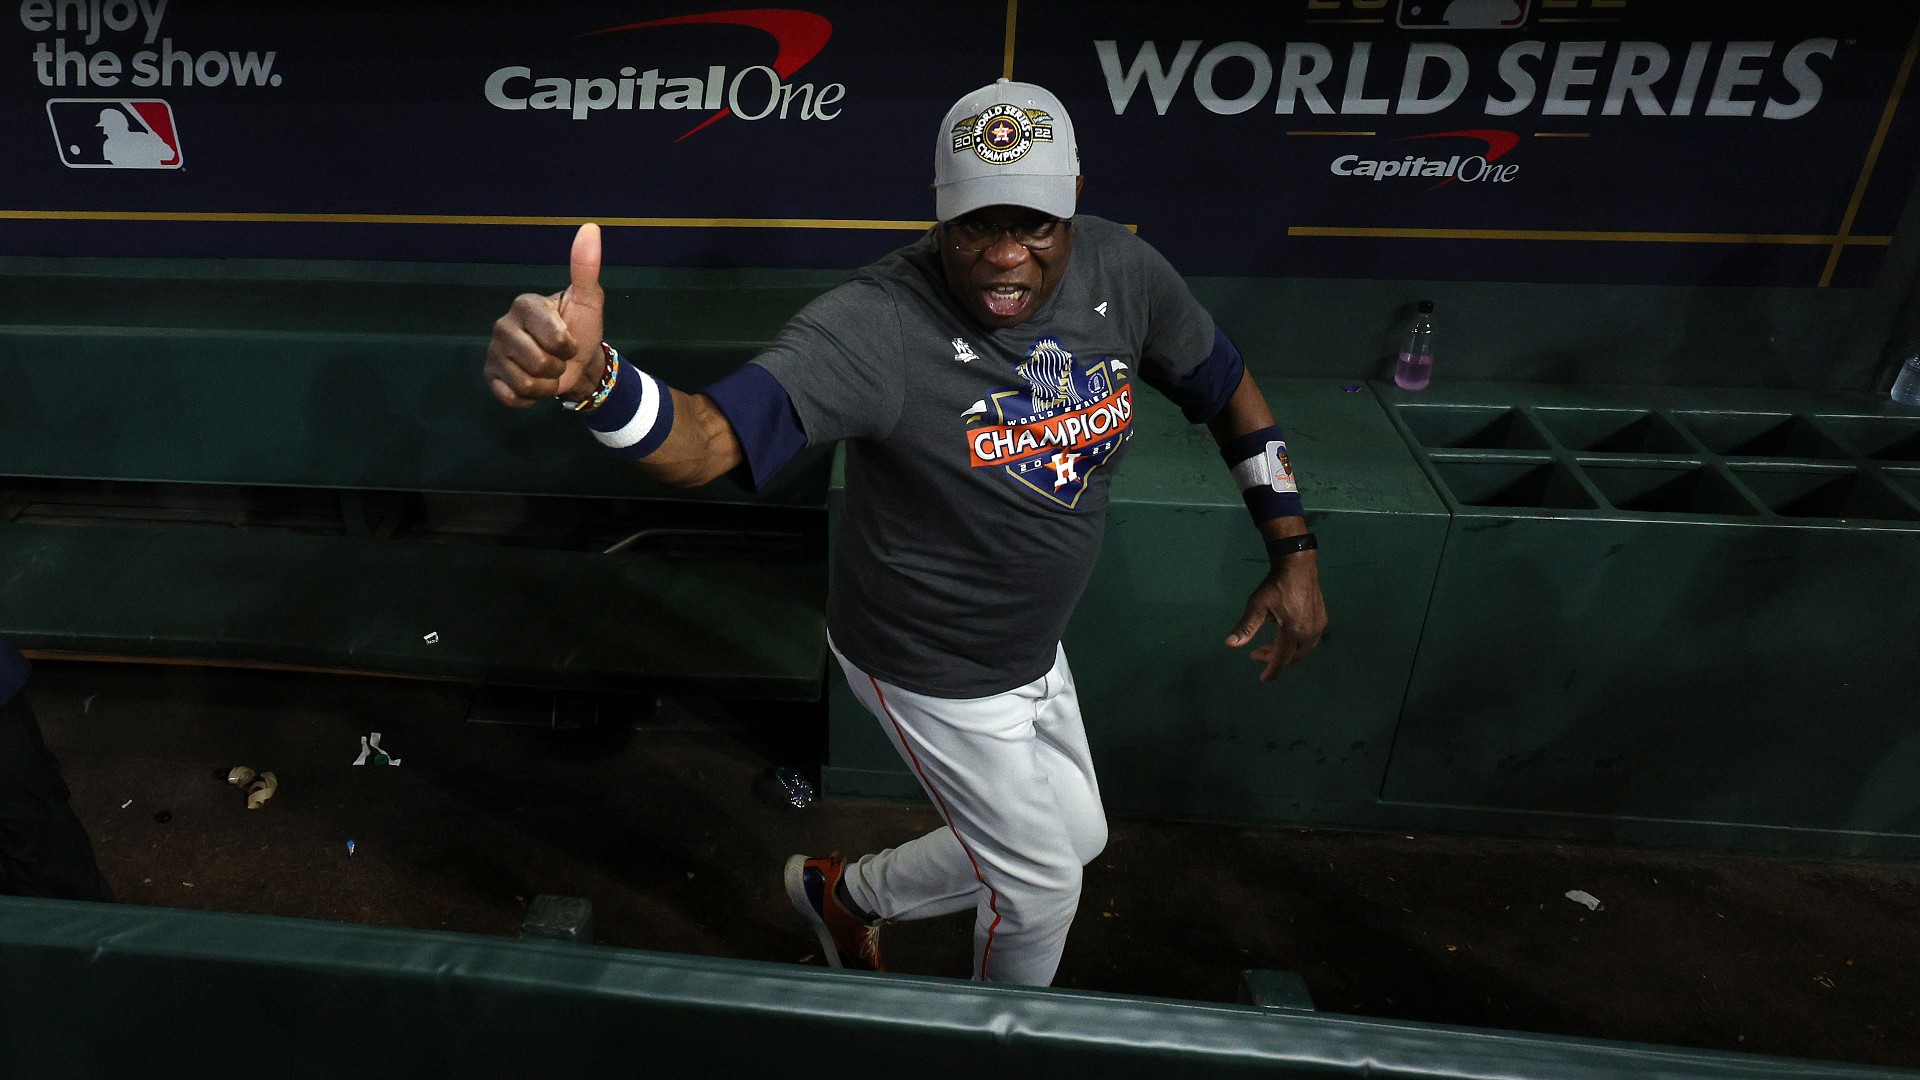 WATCH: Astros' Dusty Baker does beer luge after World Series win